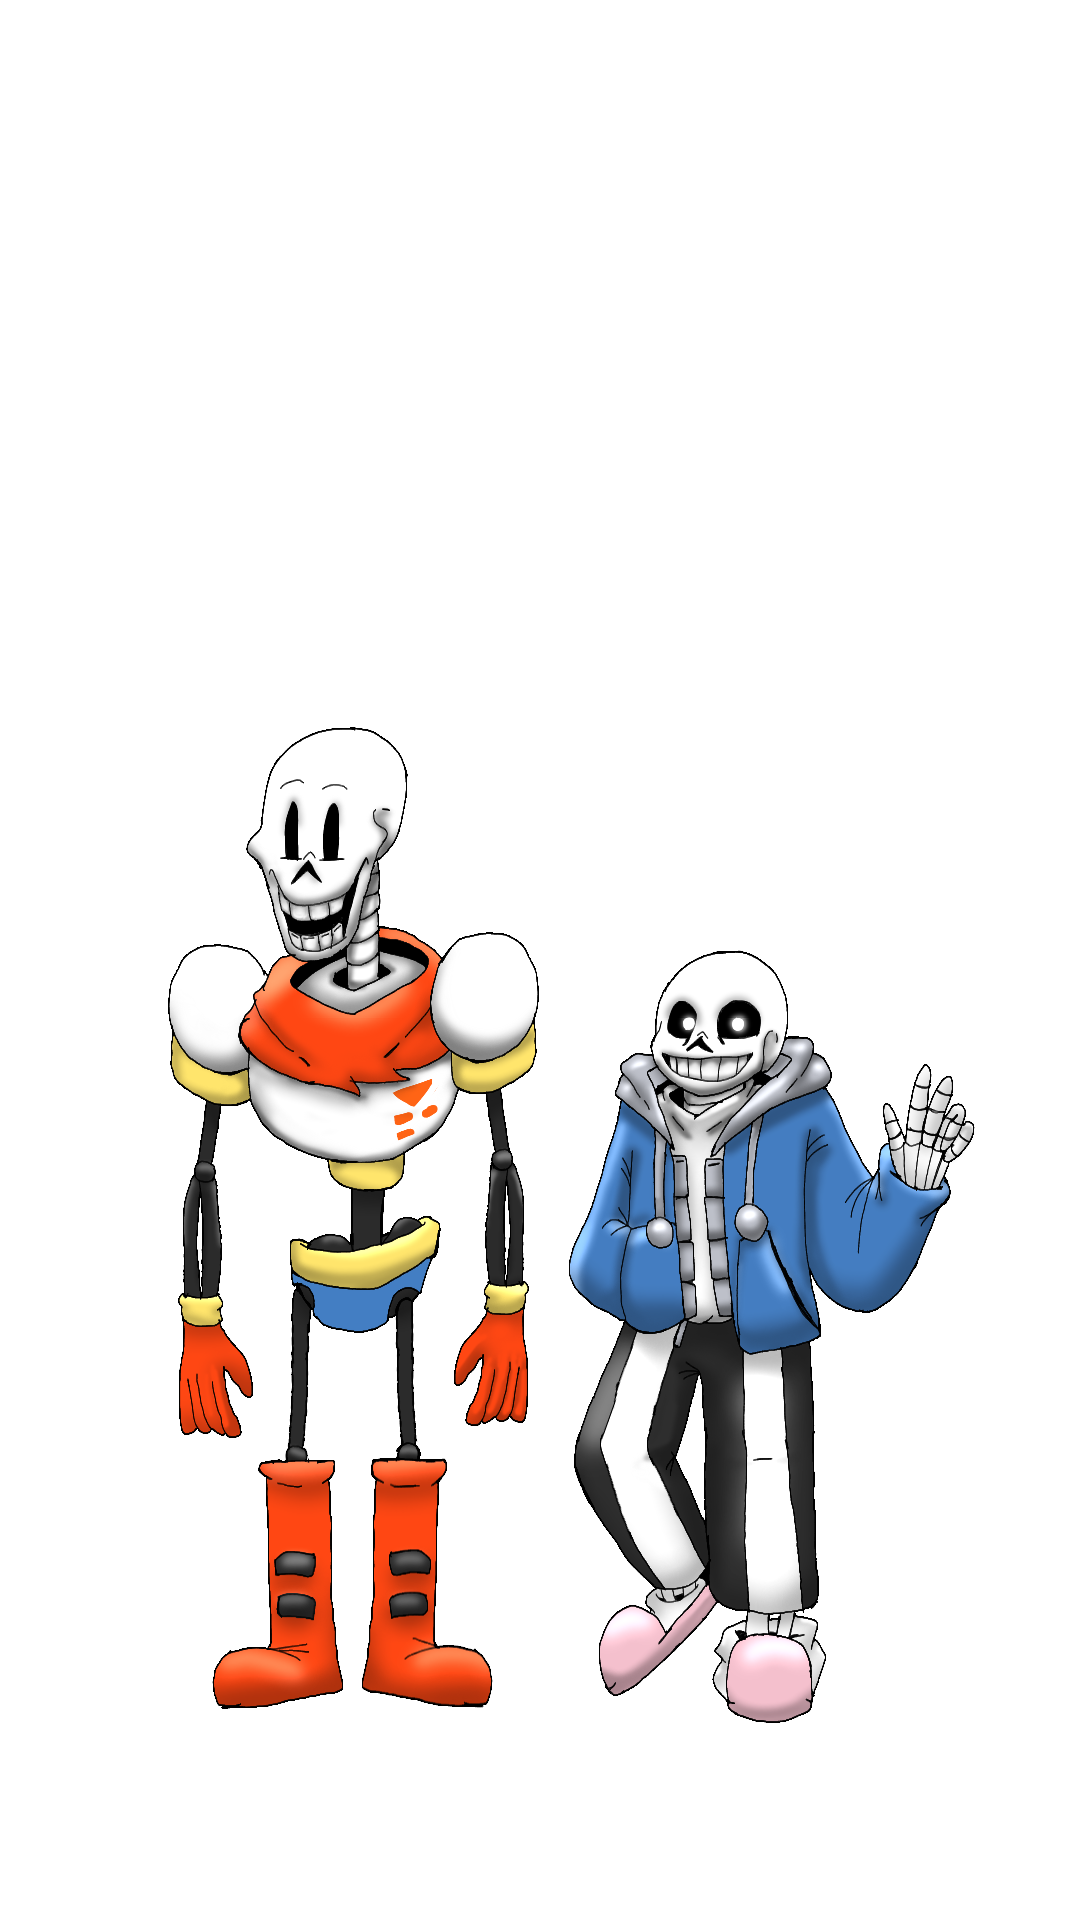 And that why I suck at Undertale by OneOneIsaac on DeviantArt